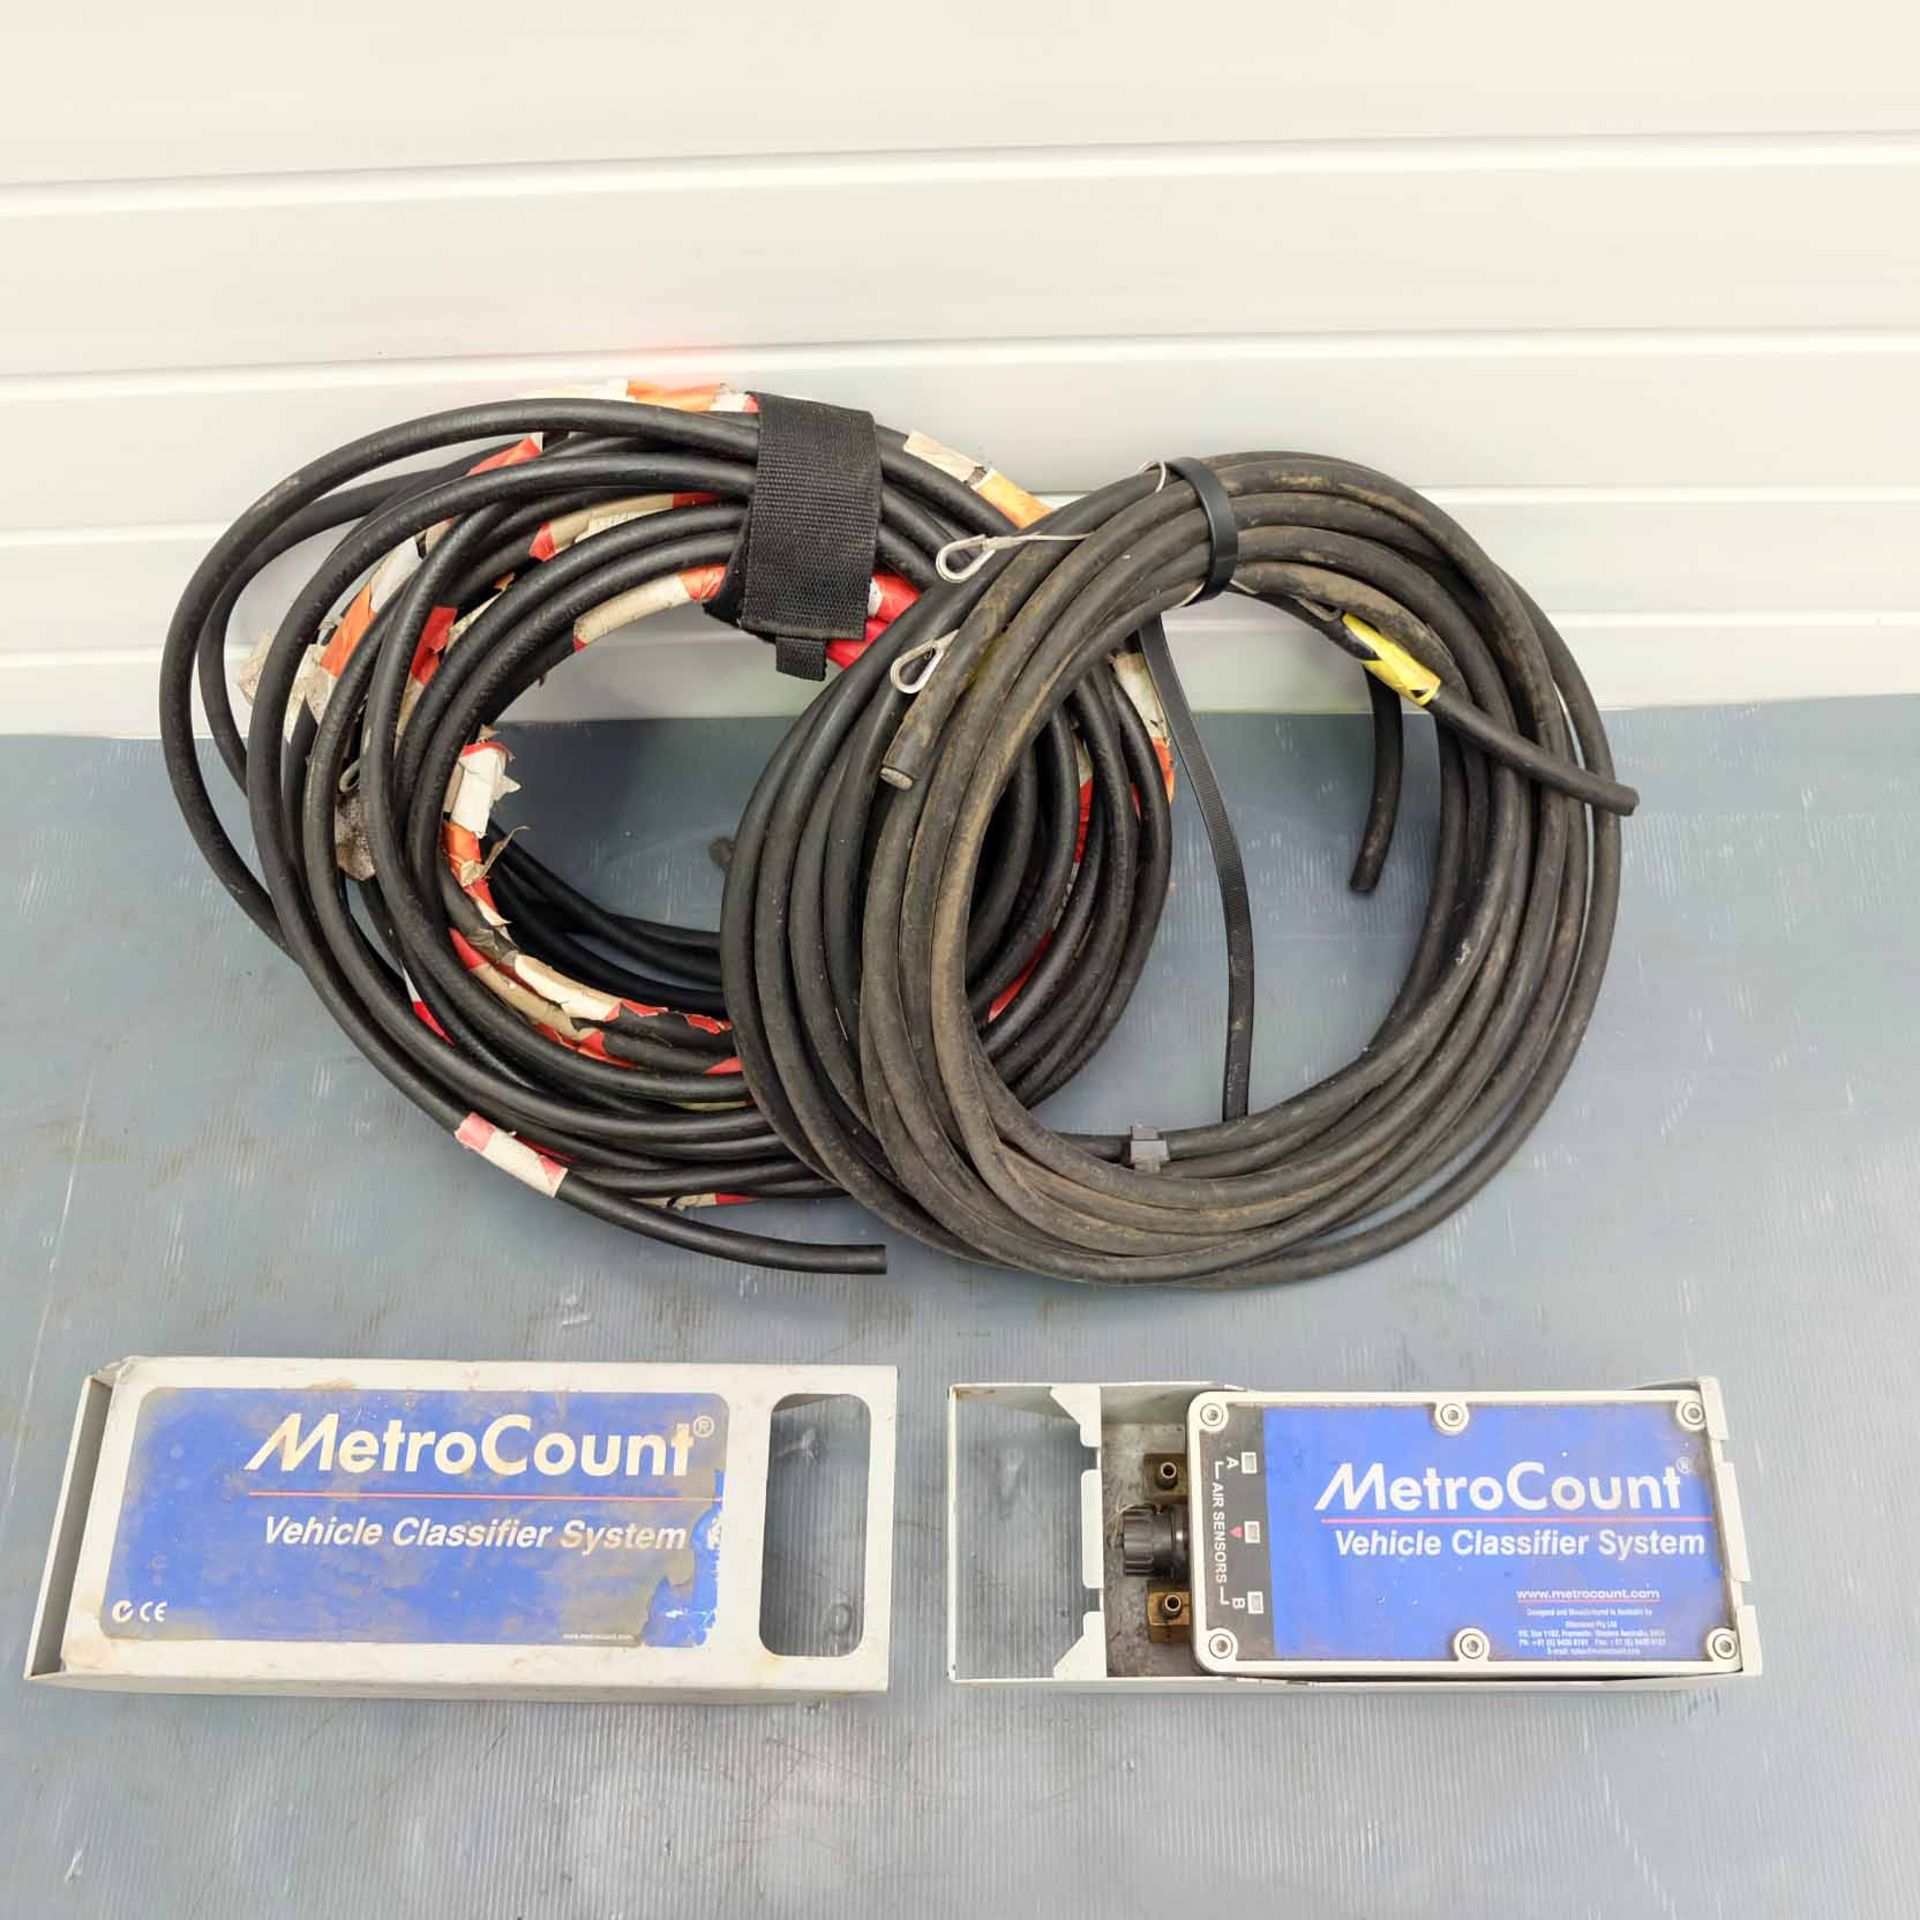 Metro Count Model MC5600 Vehicle Classifier System. With 4 x Tubes. - Image 2 of 5